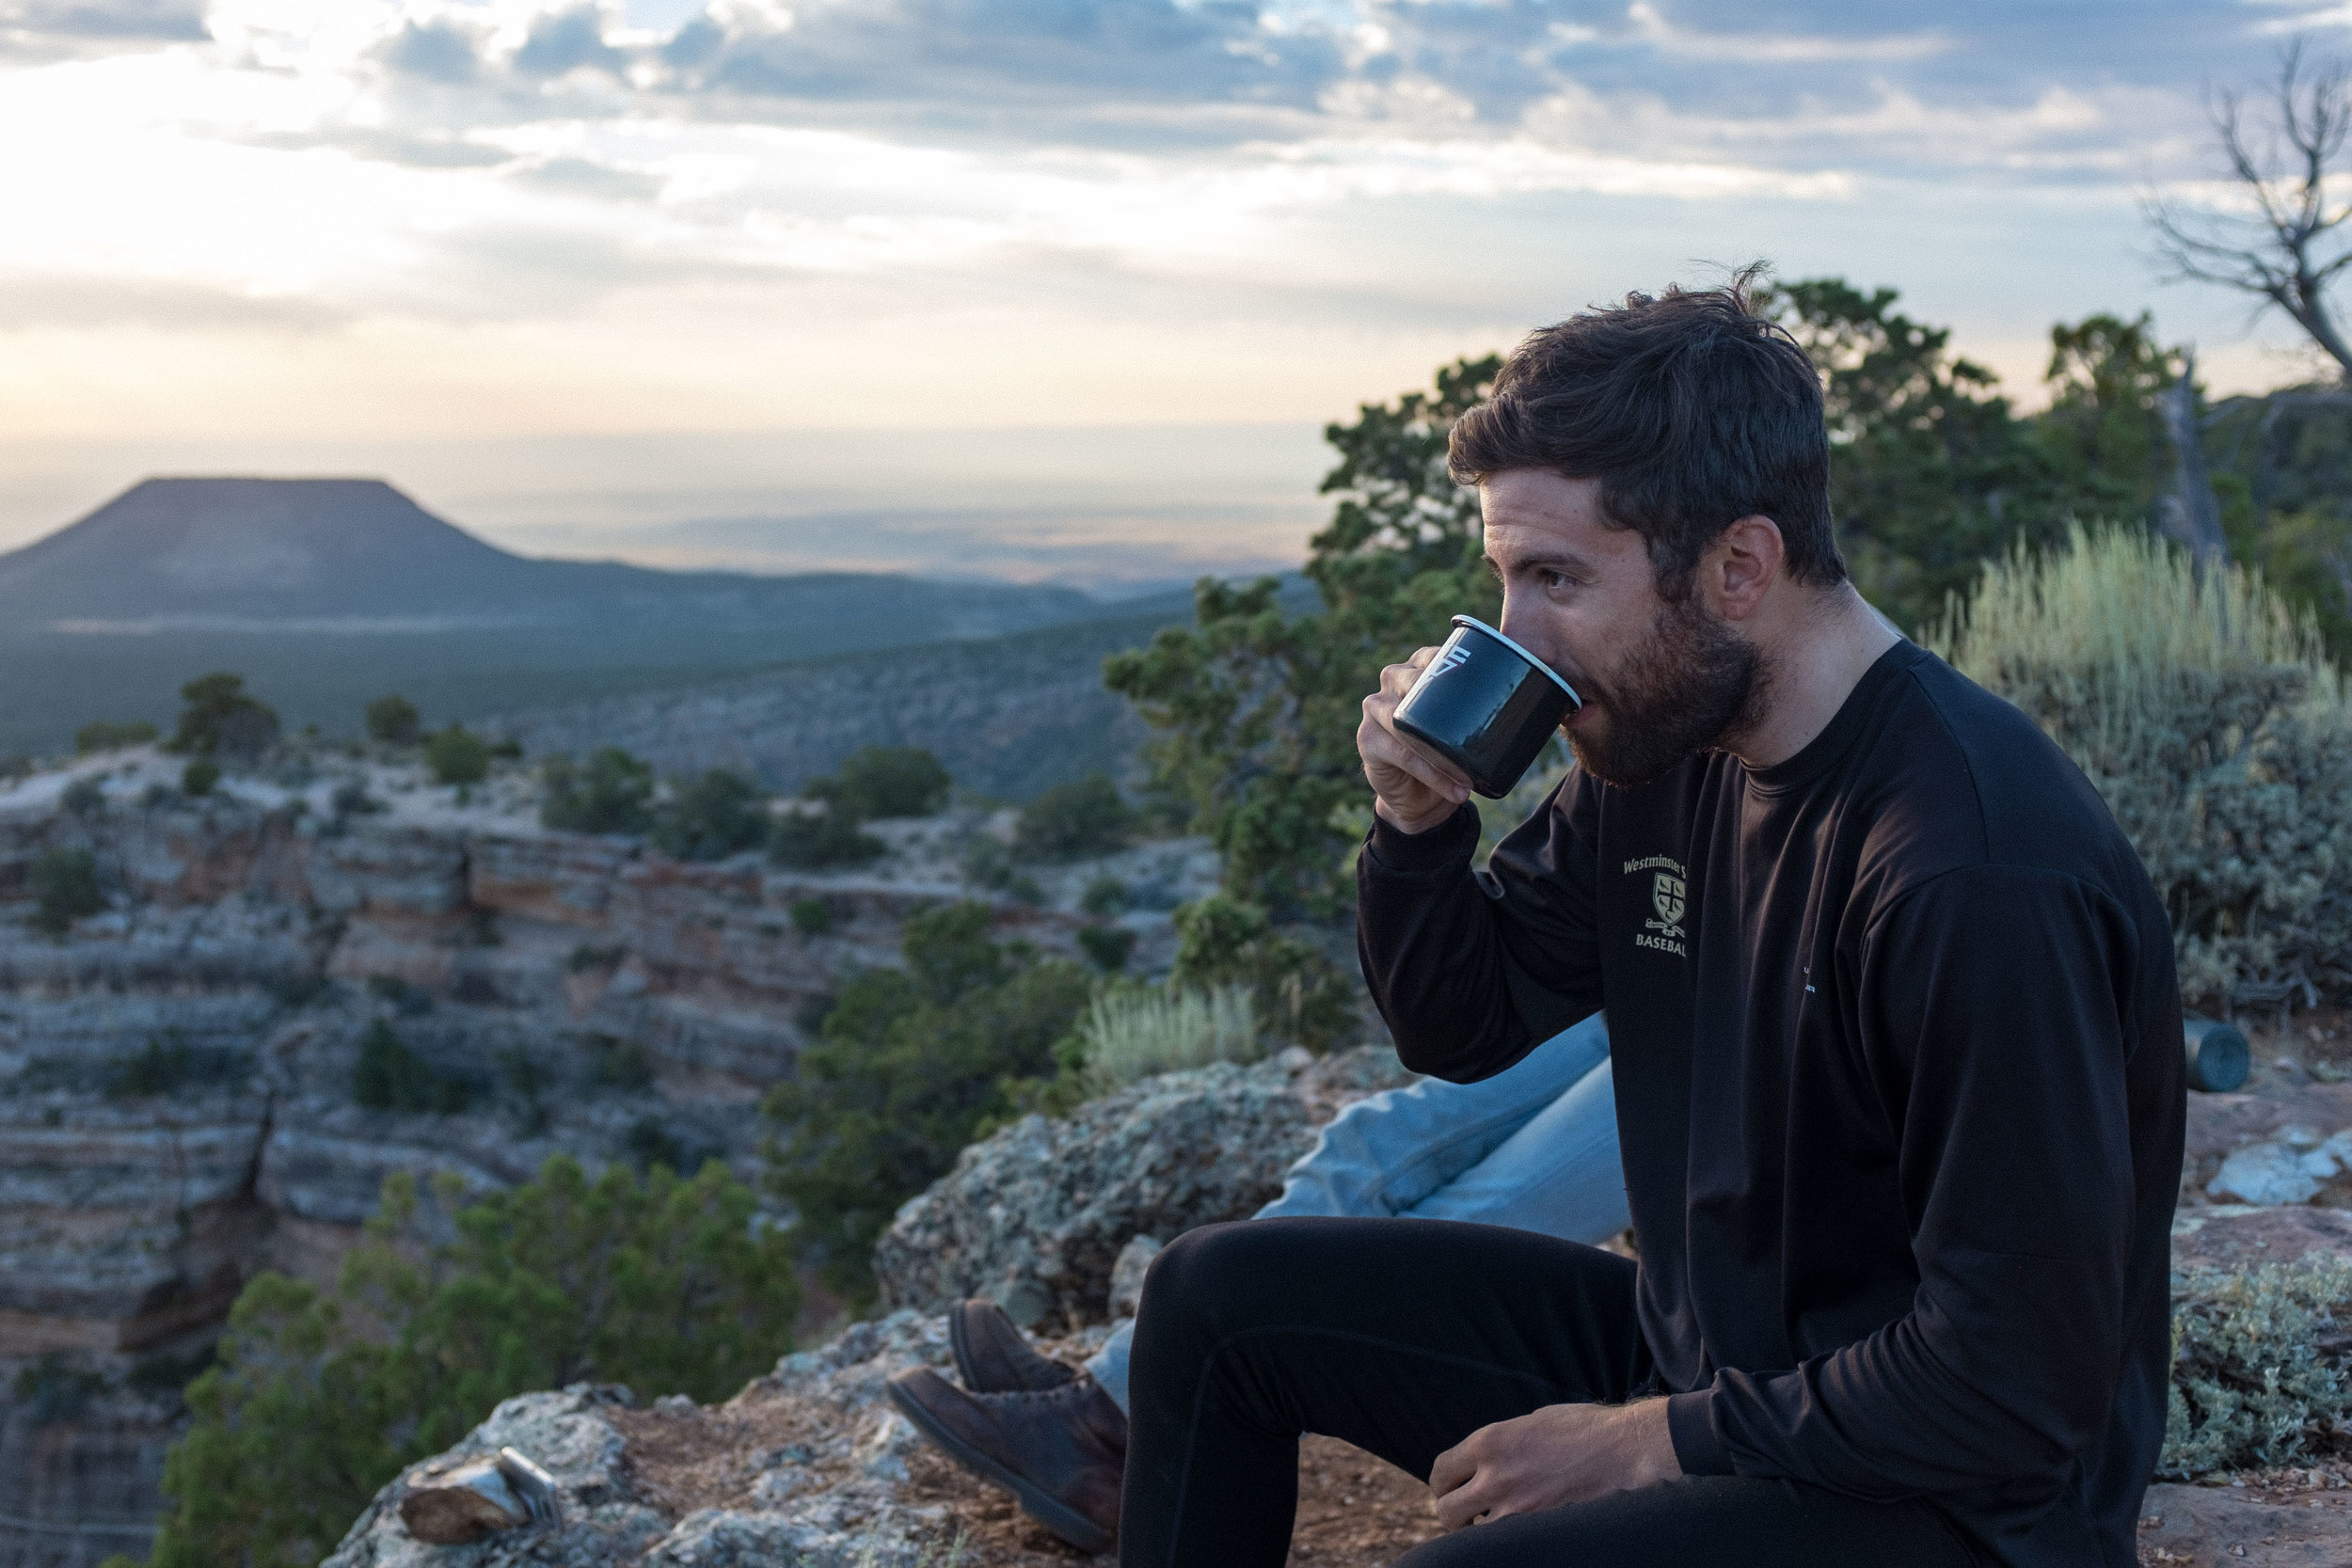 Chris and I were up before the sun to grab a secluded spot on the rim and have some coffee with our site-mates.